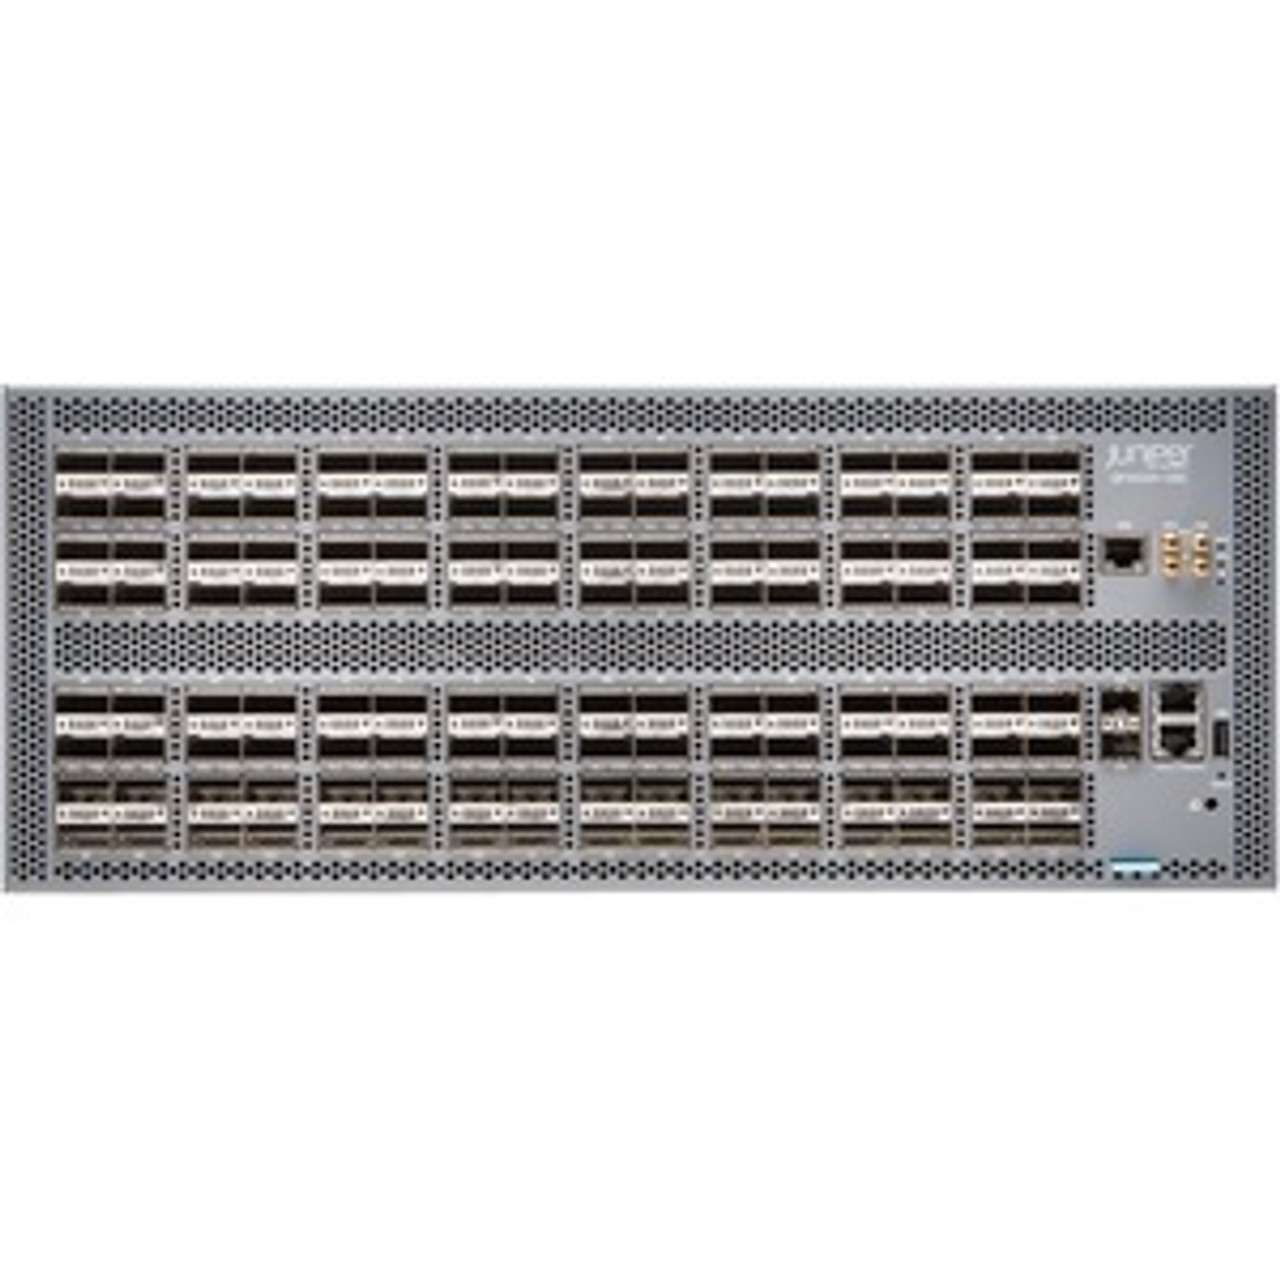 QFX5220-128C-CHAS Juniper QFX5220-128C Ethernet Switch - Manageable - 3 Layer Supported - Modular - Optical Fiber - 4U High - Rack-mountable - 1 Year Limited 